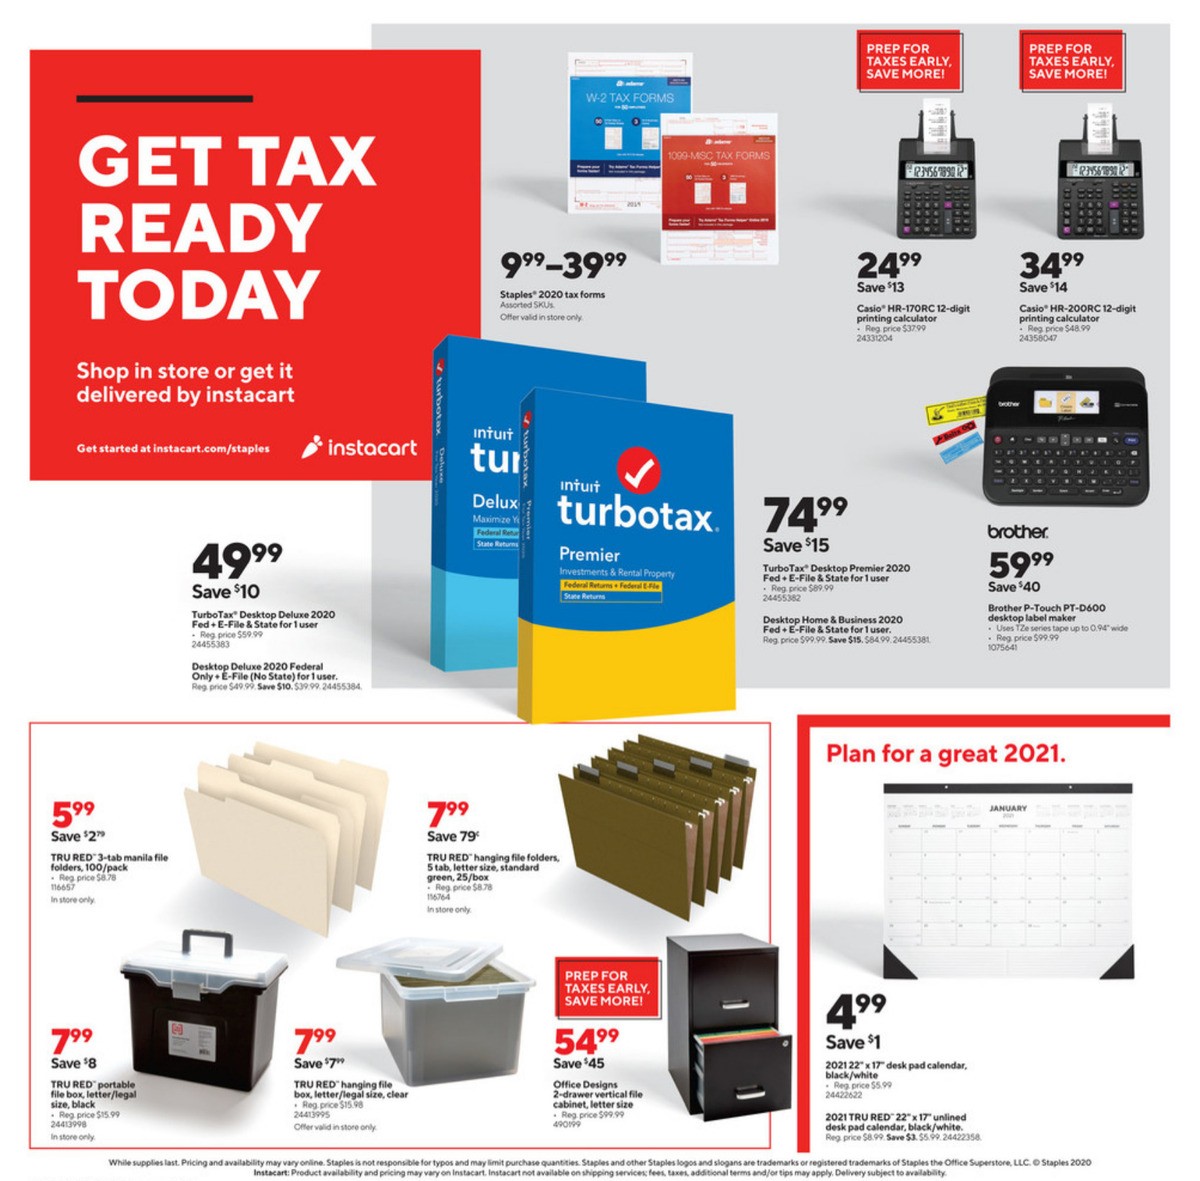 Staples Weekly Ad from January 3